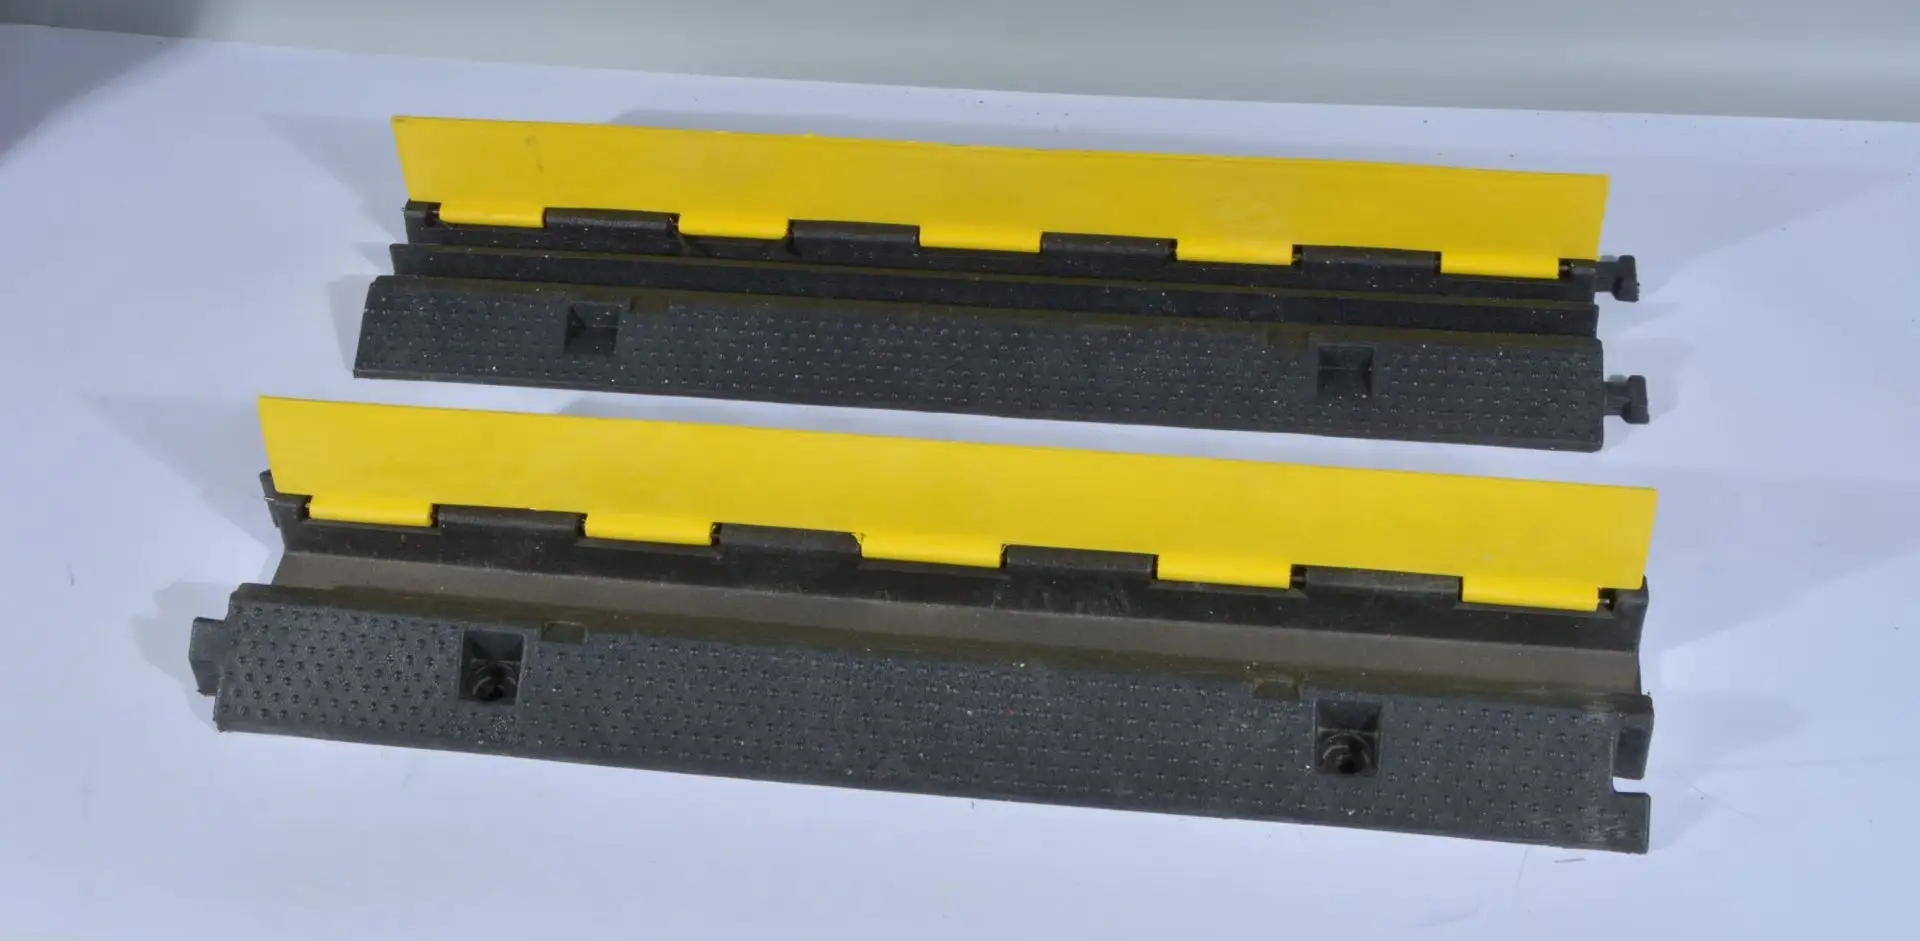 Are cable ramps or cable protective covers safe?